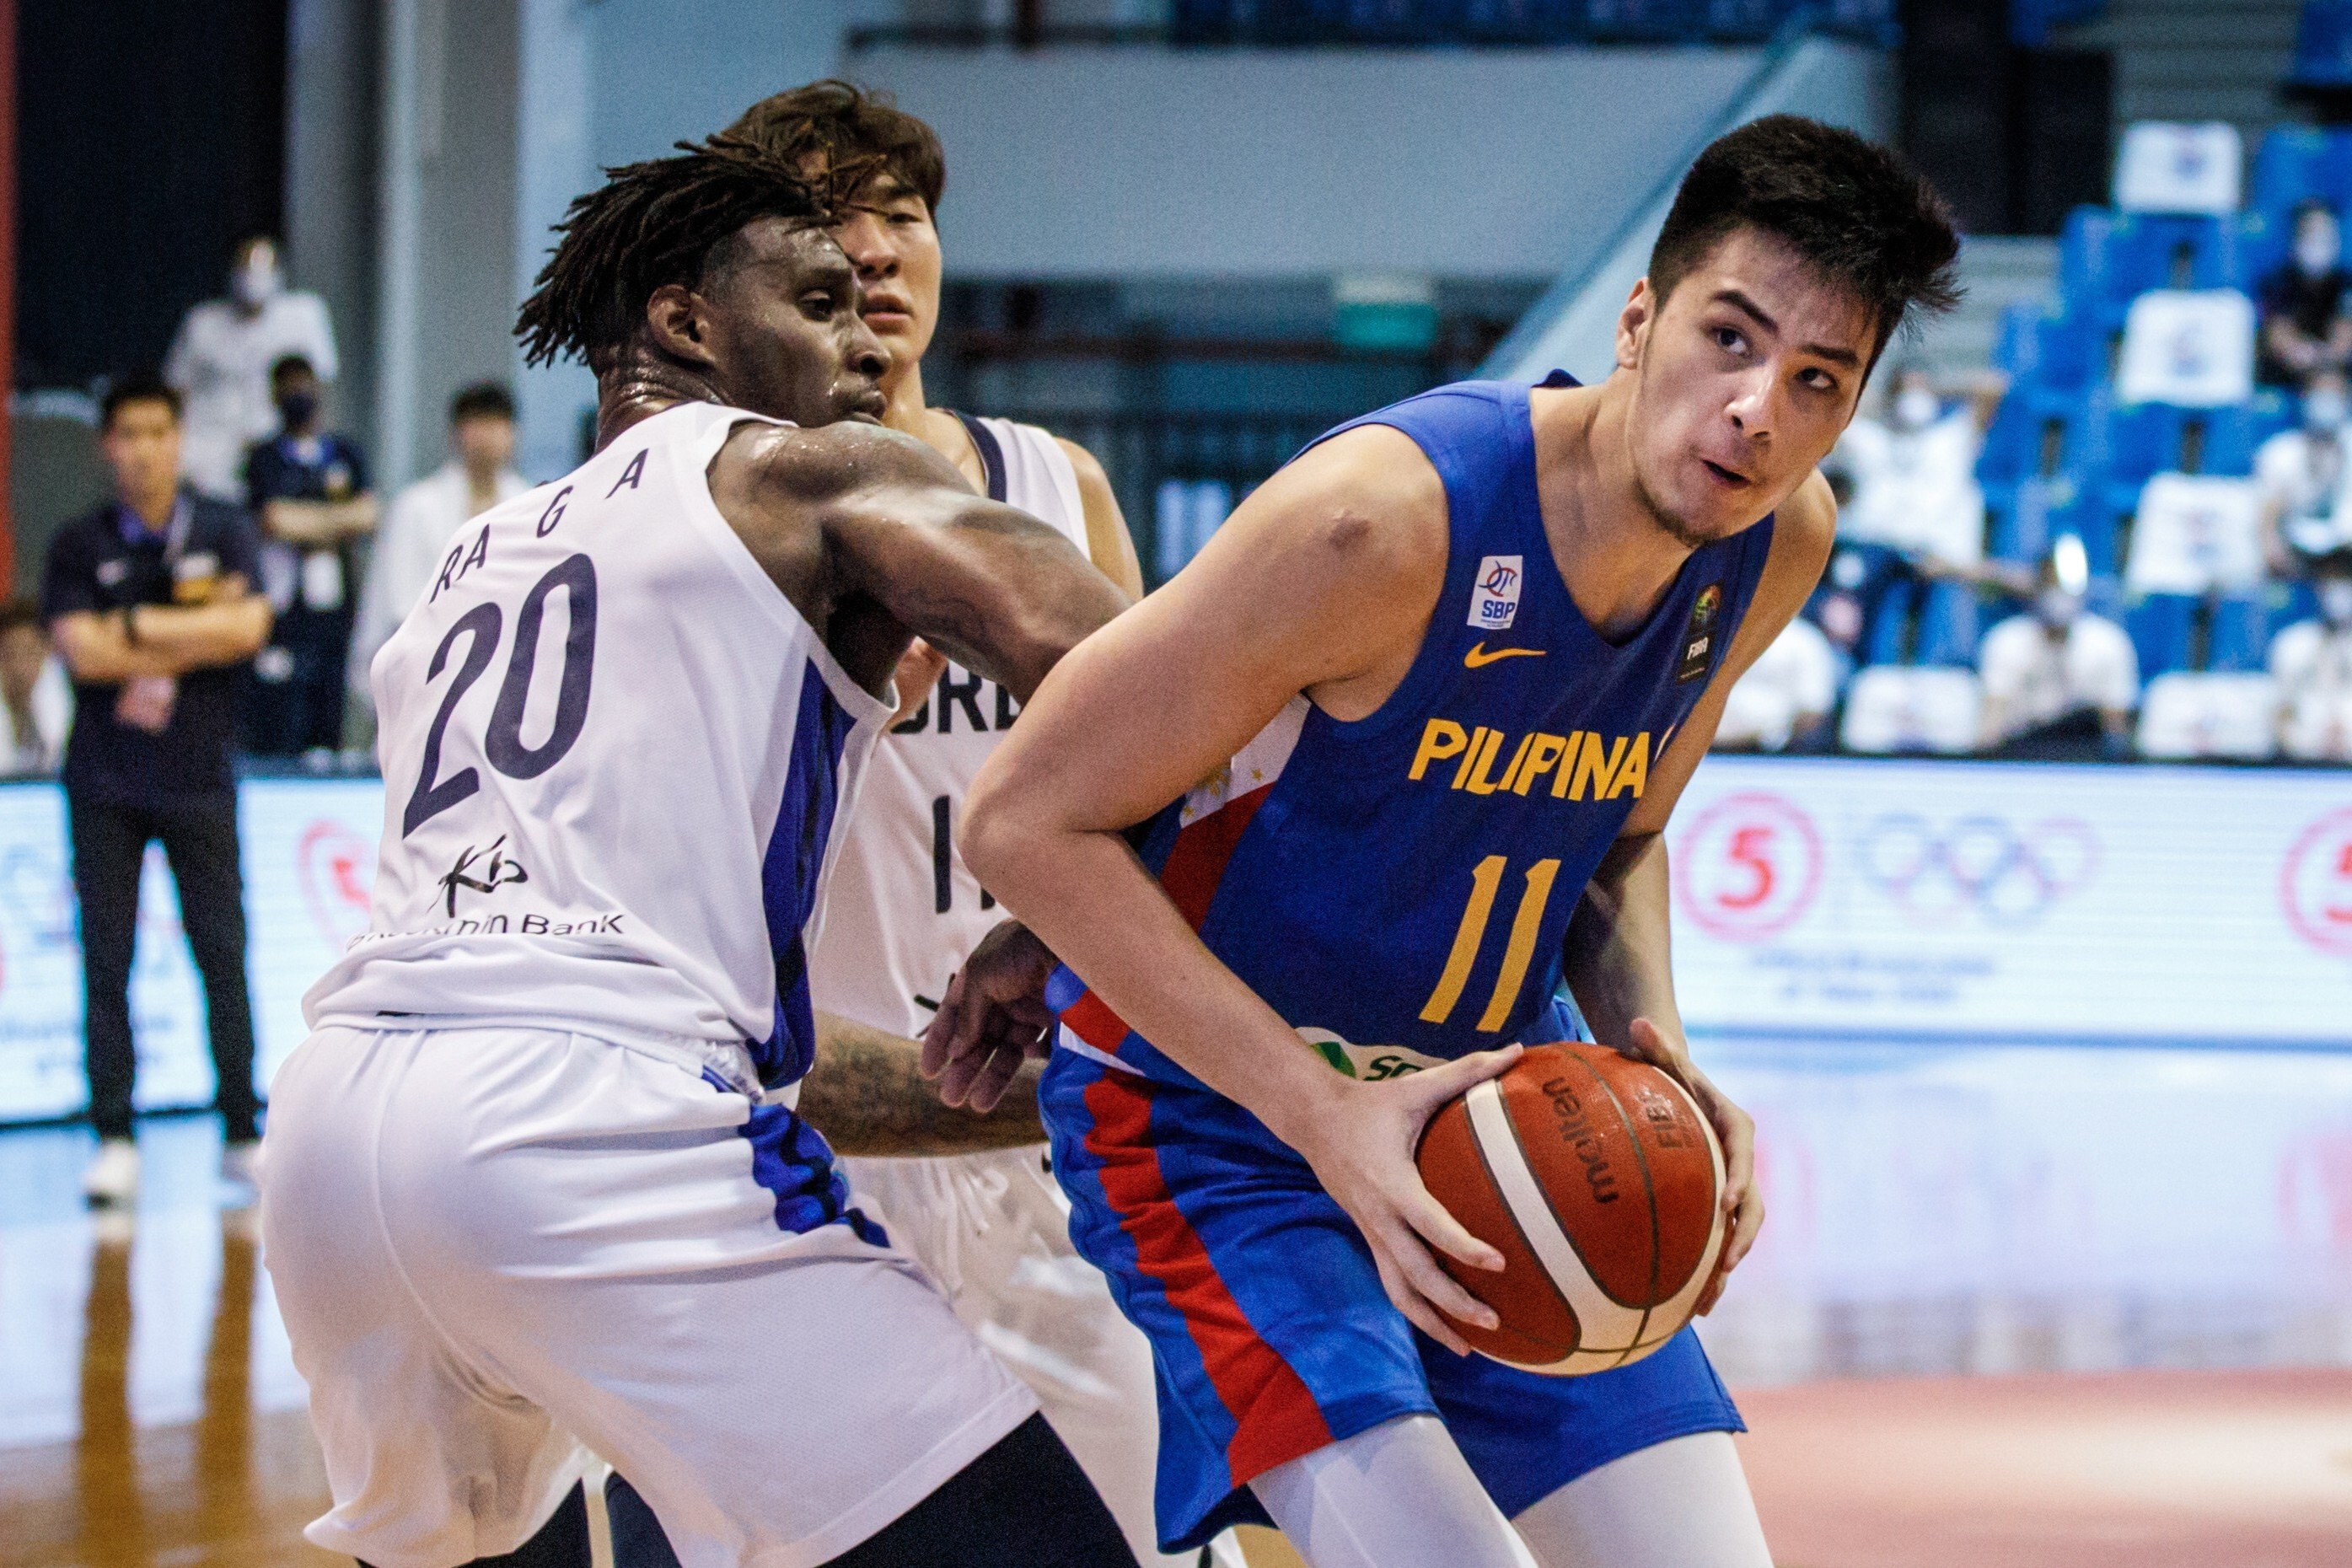 Filipino men’s national team basketball player Kai Sotto in a match against South Korea at the FIBA Asia Cup 2021 qualifiers at the Angeles City Foundation Gym, the Philippines in June. Photo: EPA